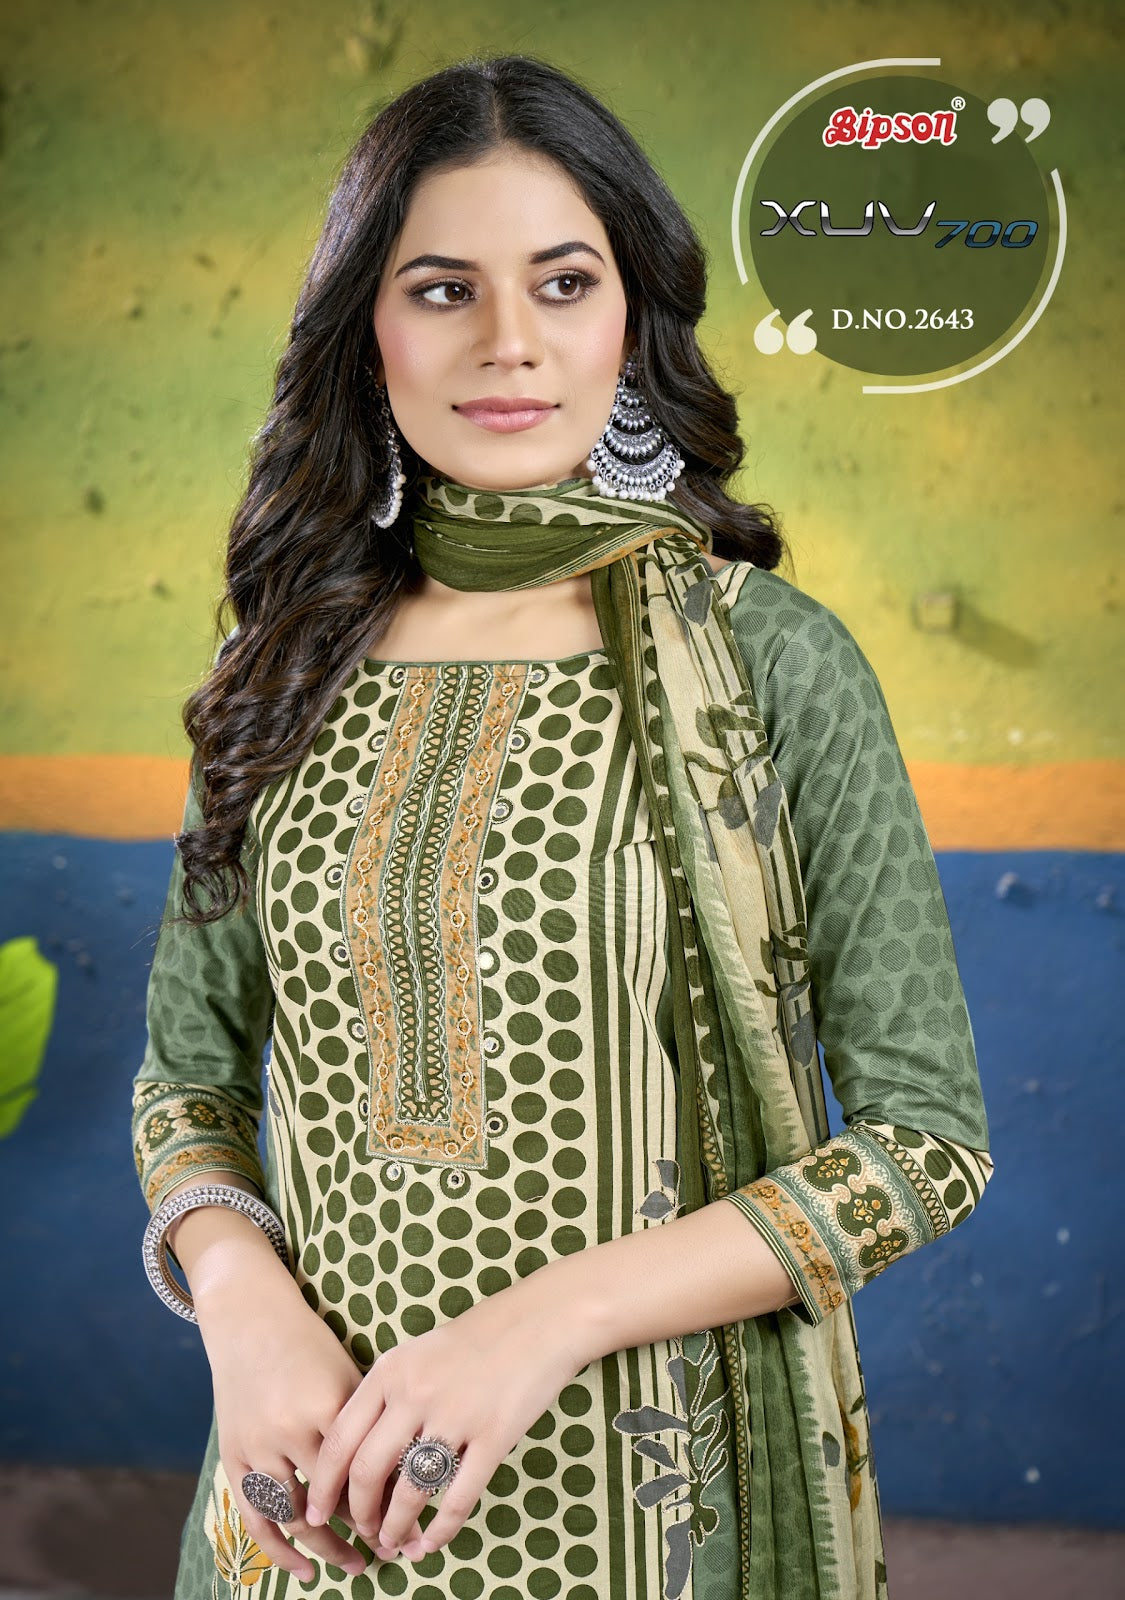 Xuv 700- 2643 Bipson Prints Cambric Cotton Pant Style Suits Supplier Ahmedabad